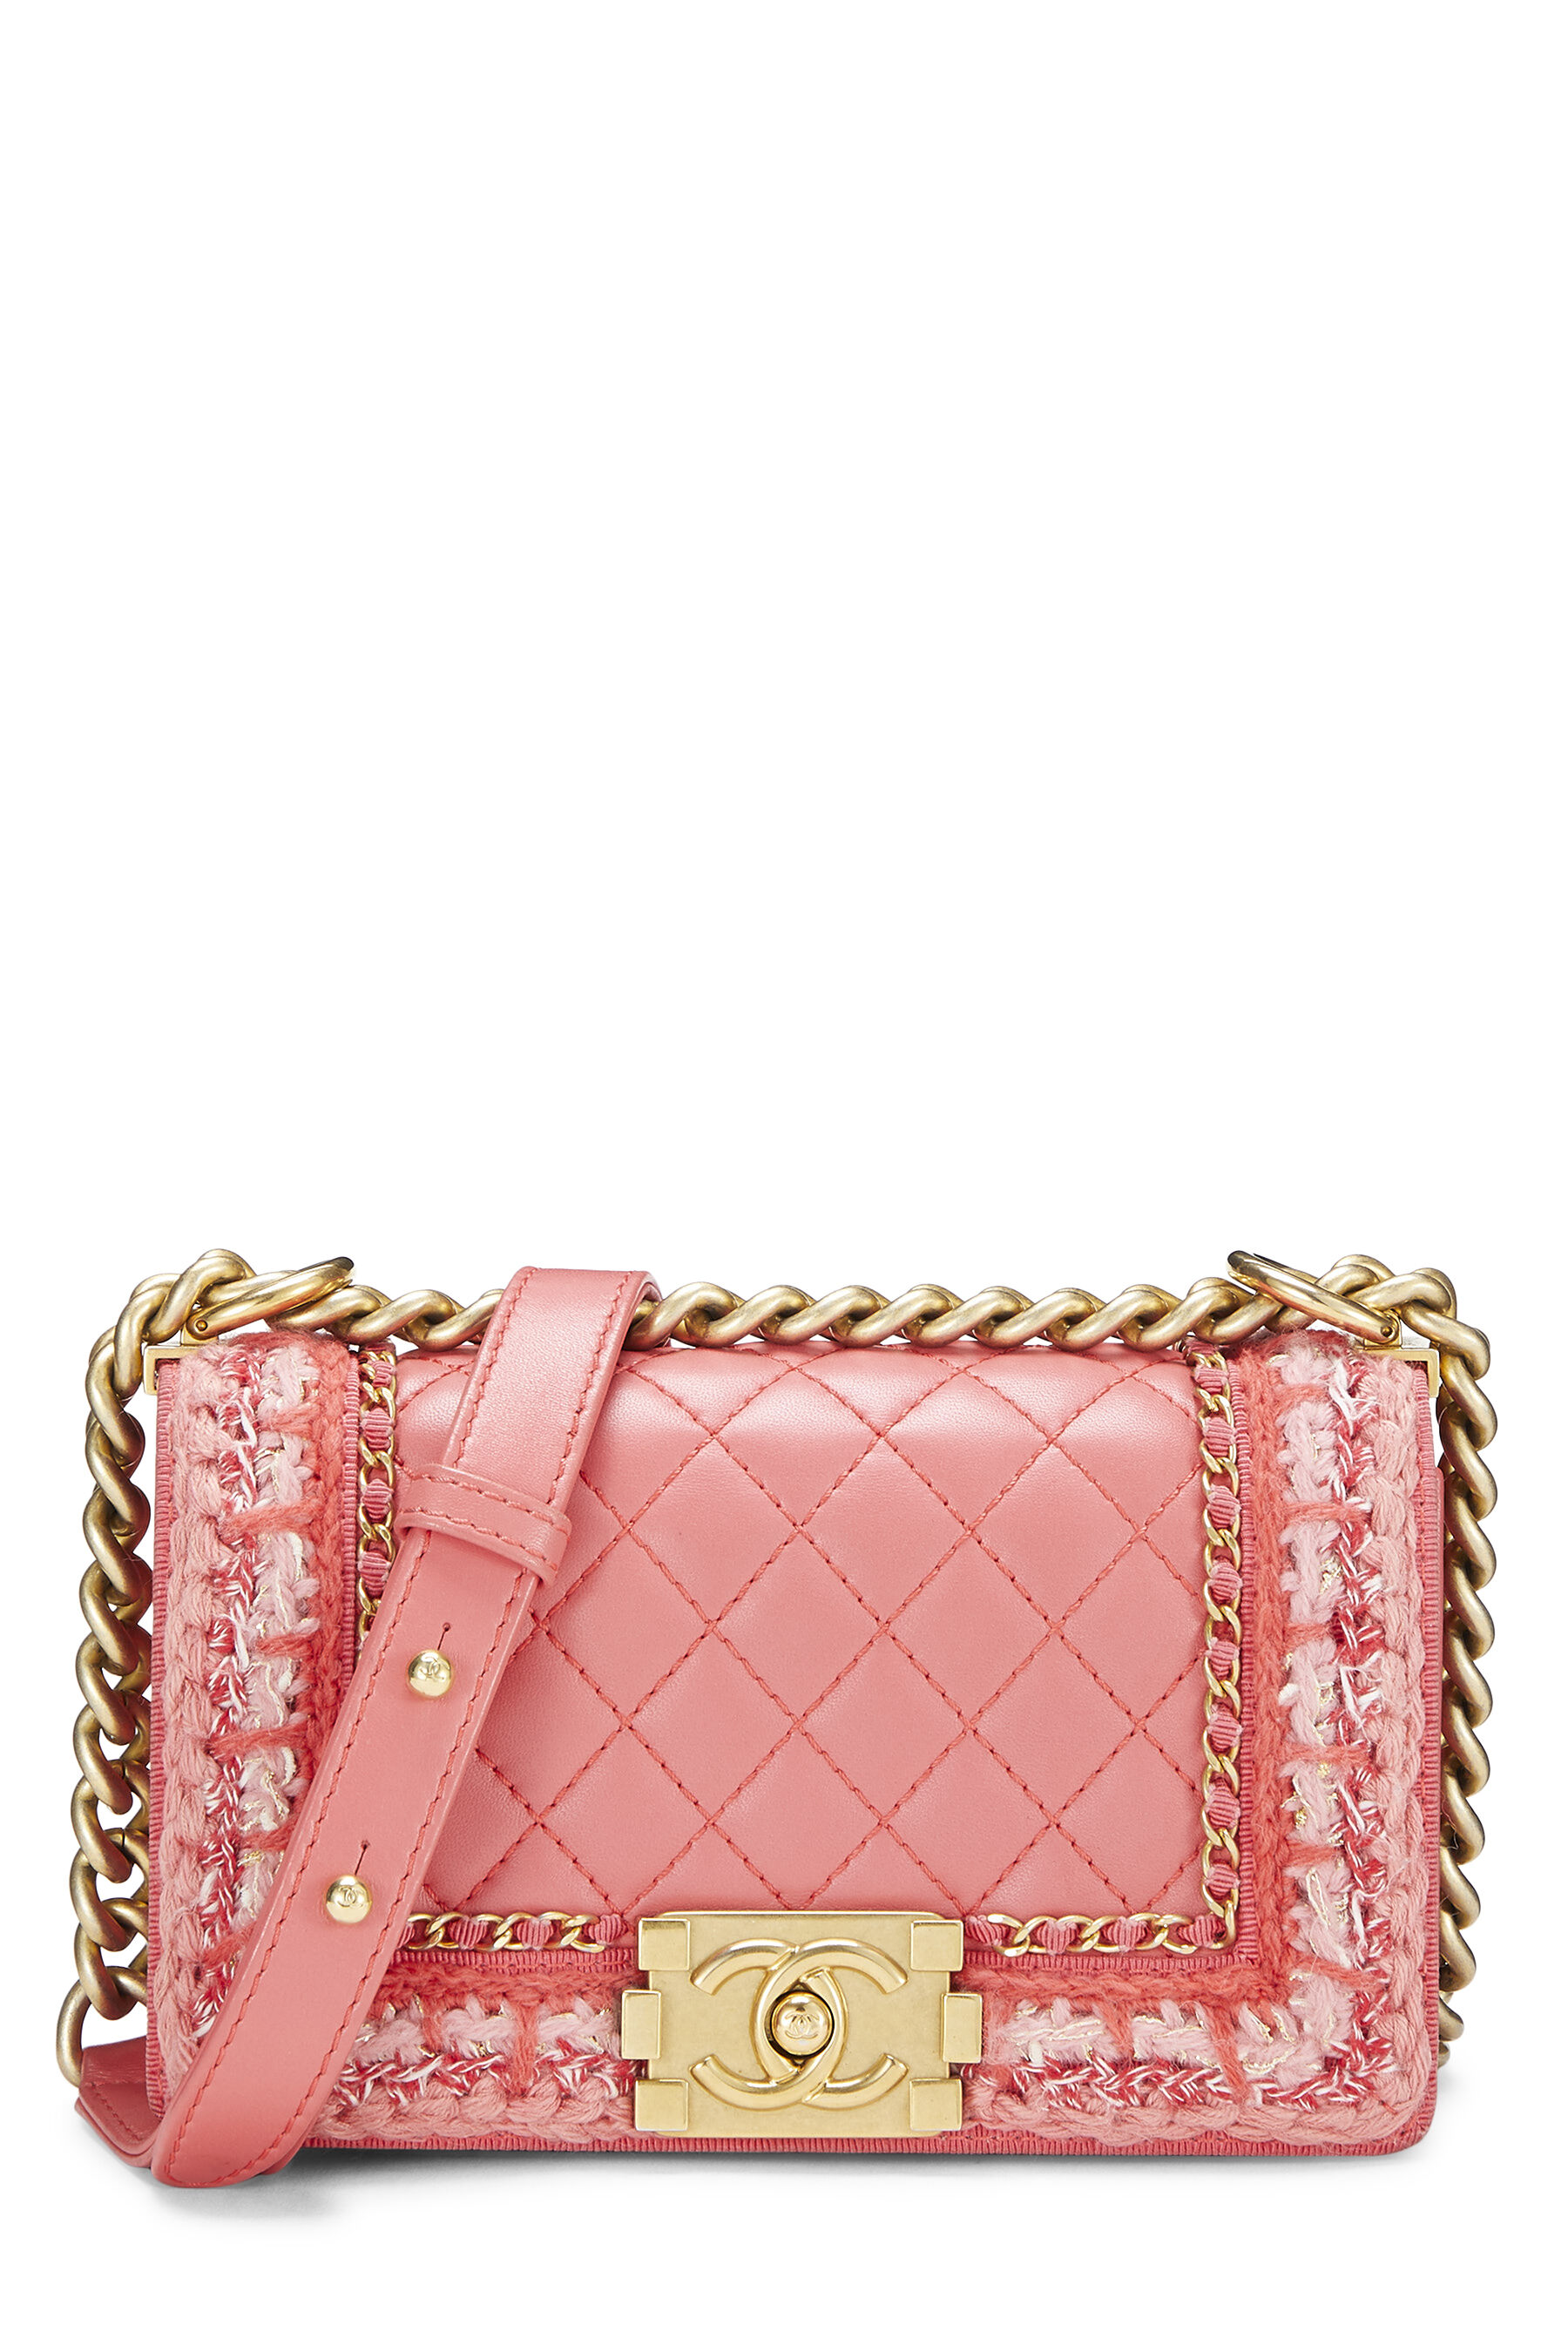 Chanel - Pink Quilted Lambskin & Tweed Boy Bag Small